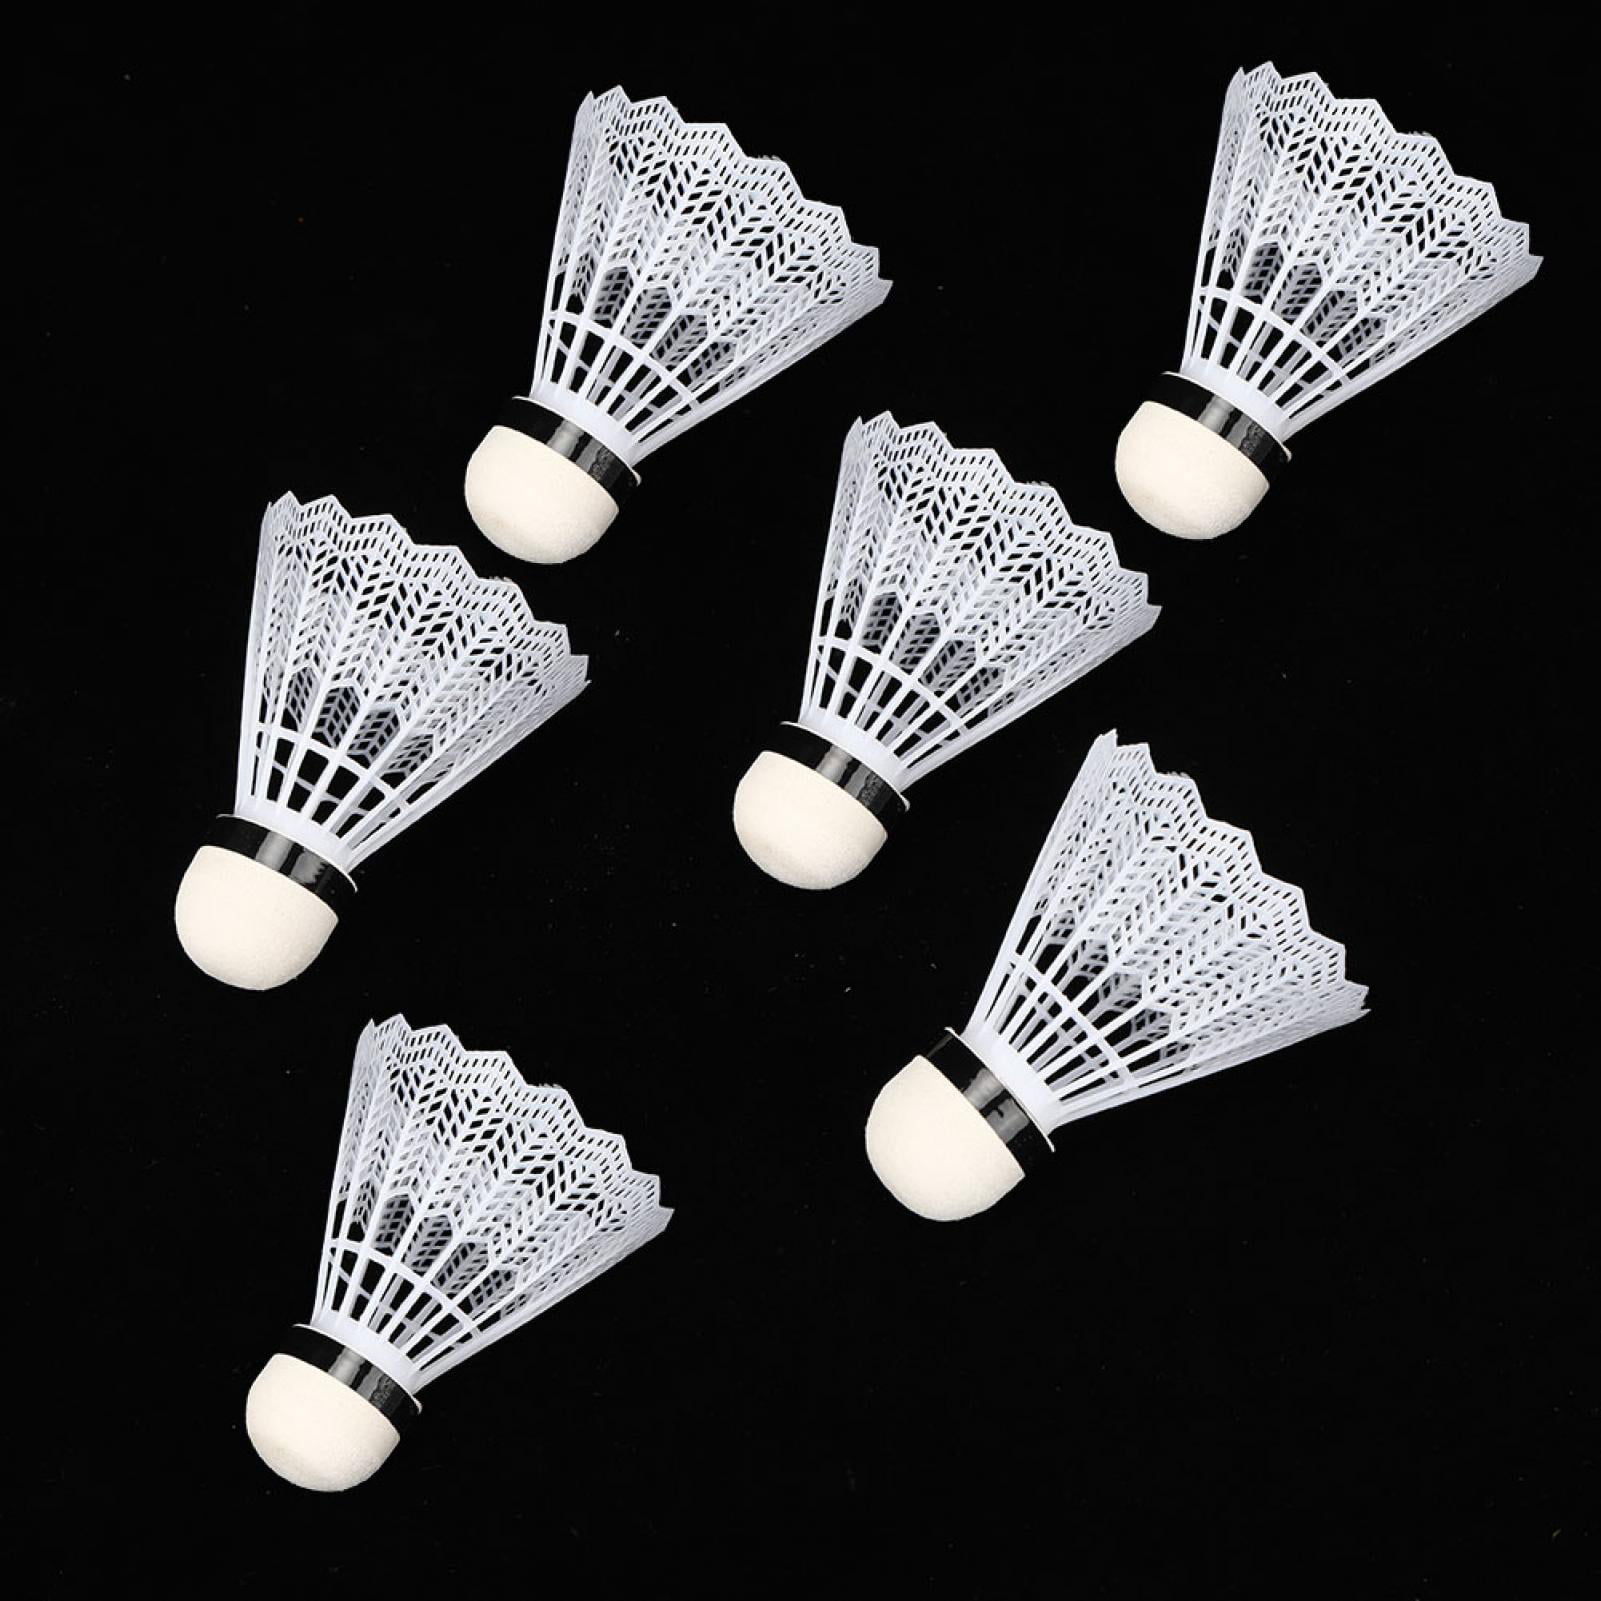 6 Pcs Badminton White Plastic Shuttlecocks Indoor Outdoor Gym Sports Accessories 